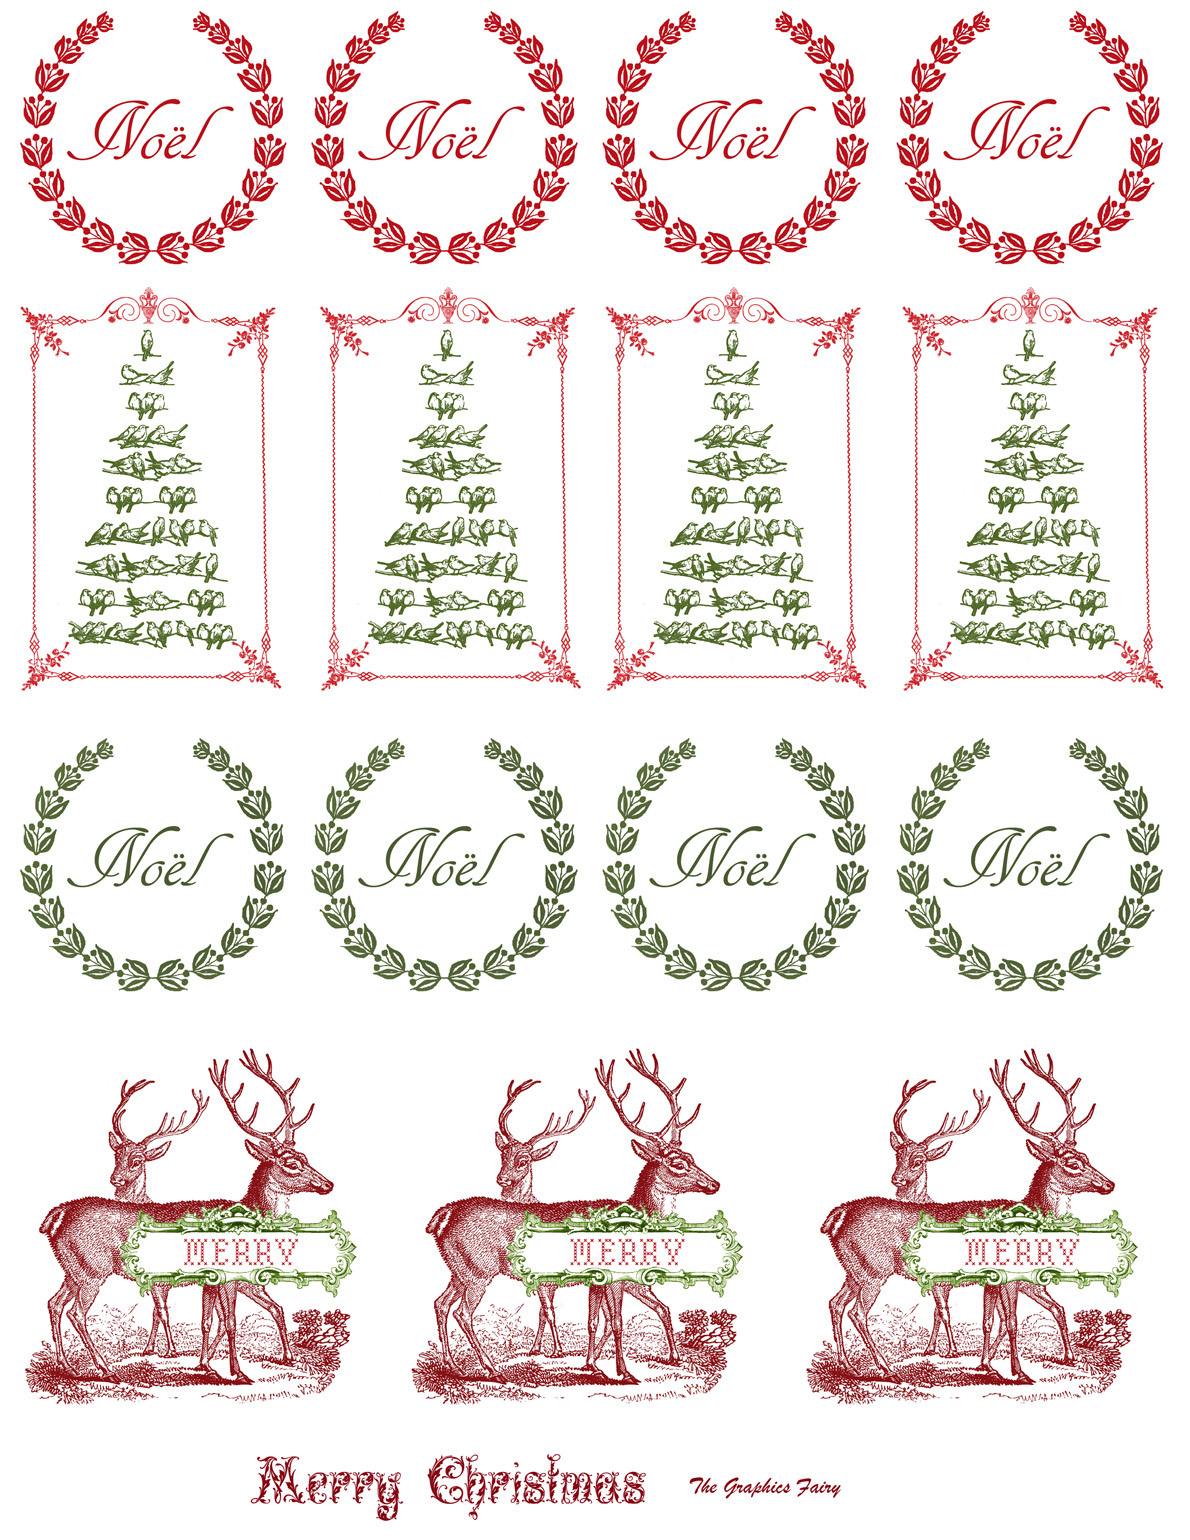 2 Printable Christmas Stickers The Graphics Fairy